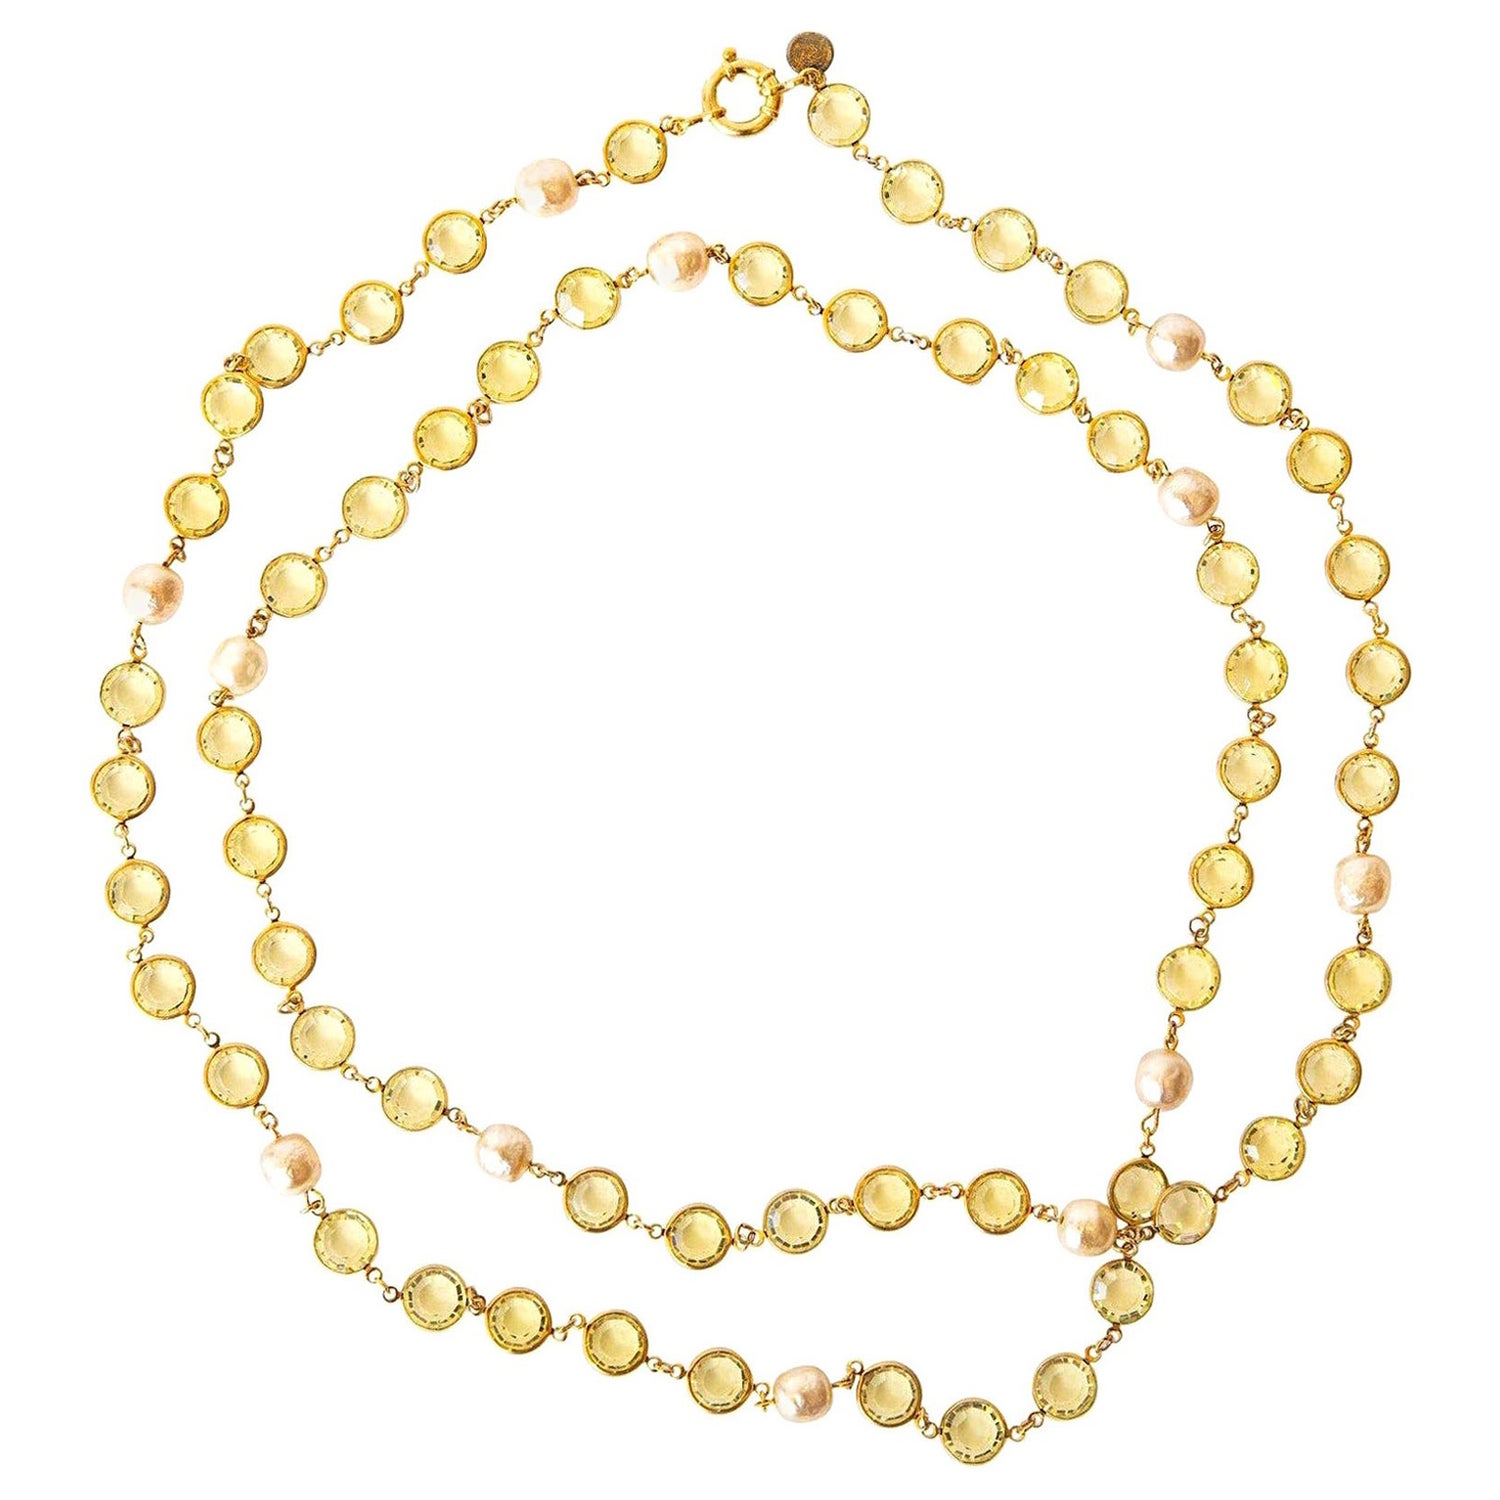 chanel jewelry pearl necklace vintage